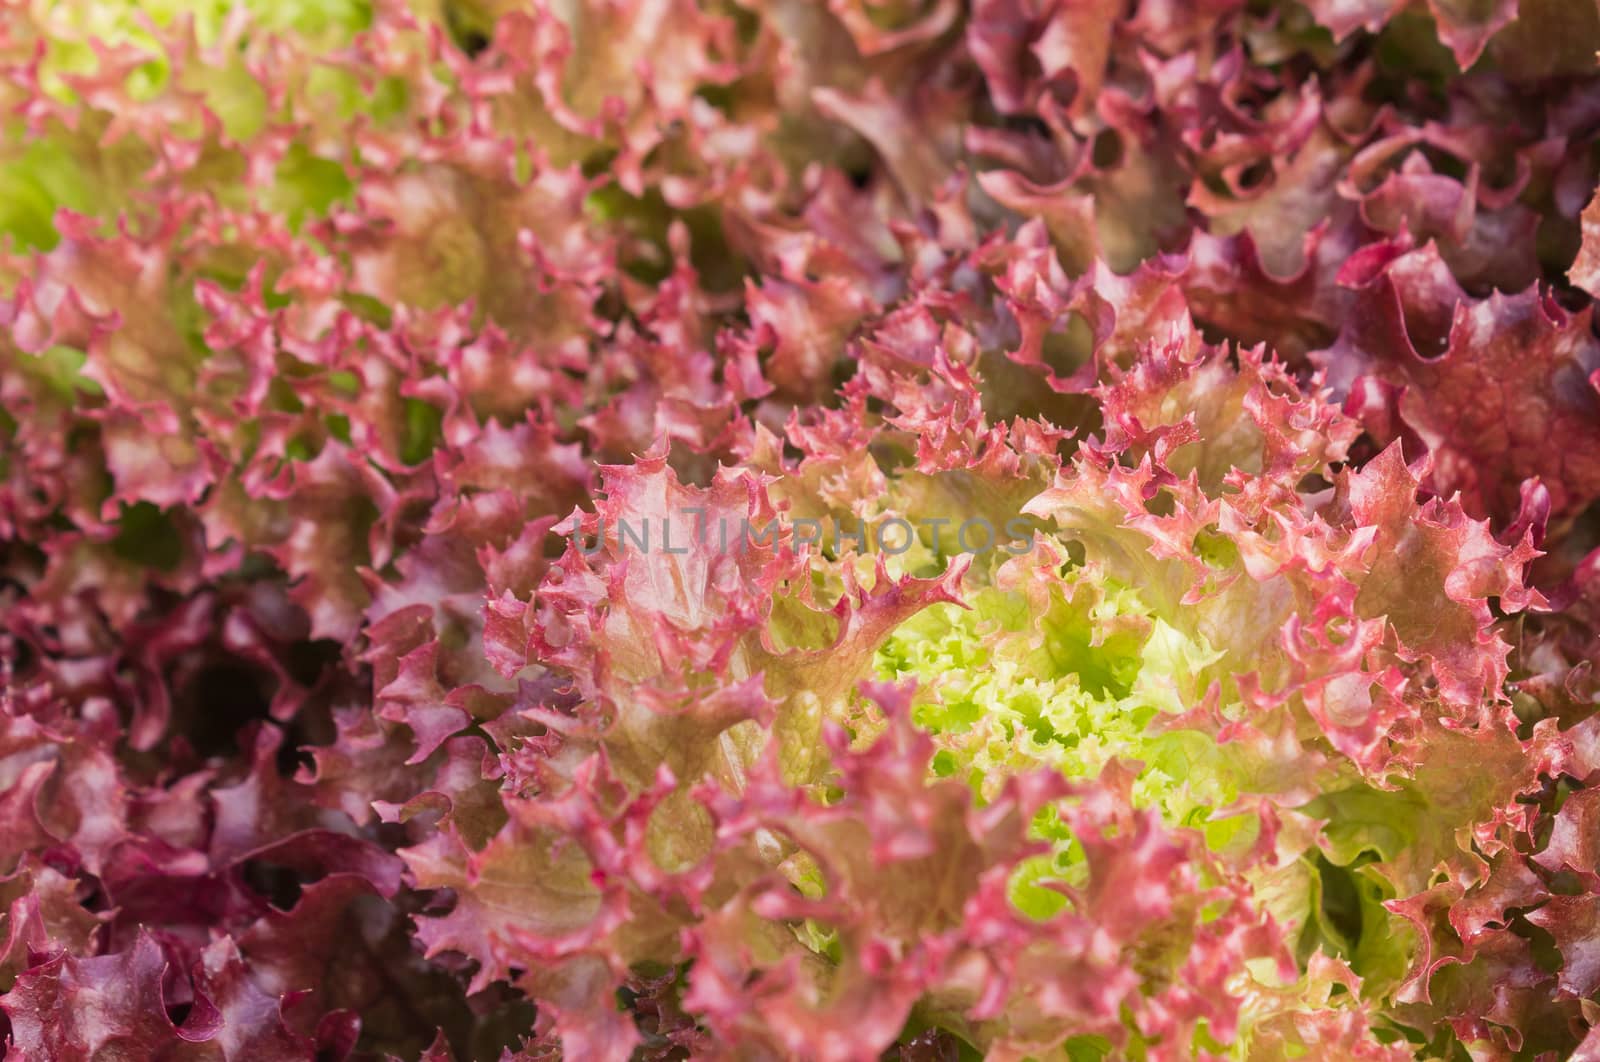 Red leaf lettuce or red coral in garden close up. Fresh red leaf lettuce or red coral texture. Red leaf lettuce or red coral for health. Vegetarian food red leaf 
lettuce or red coral.